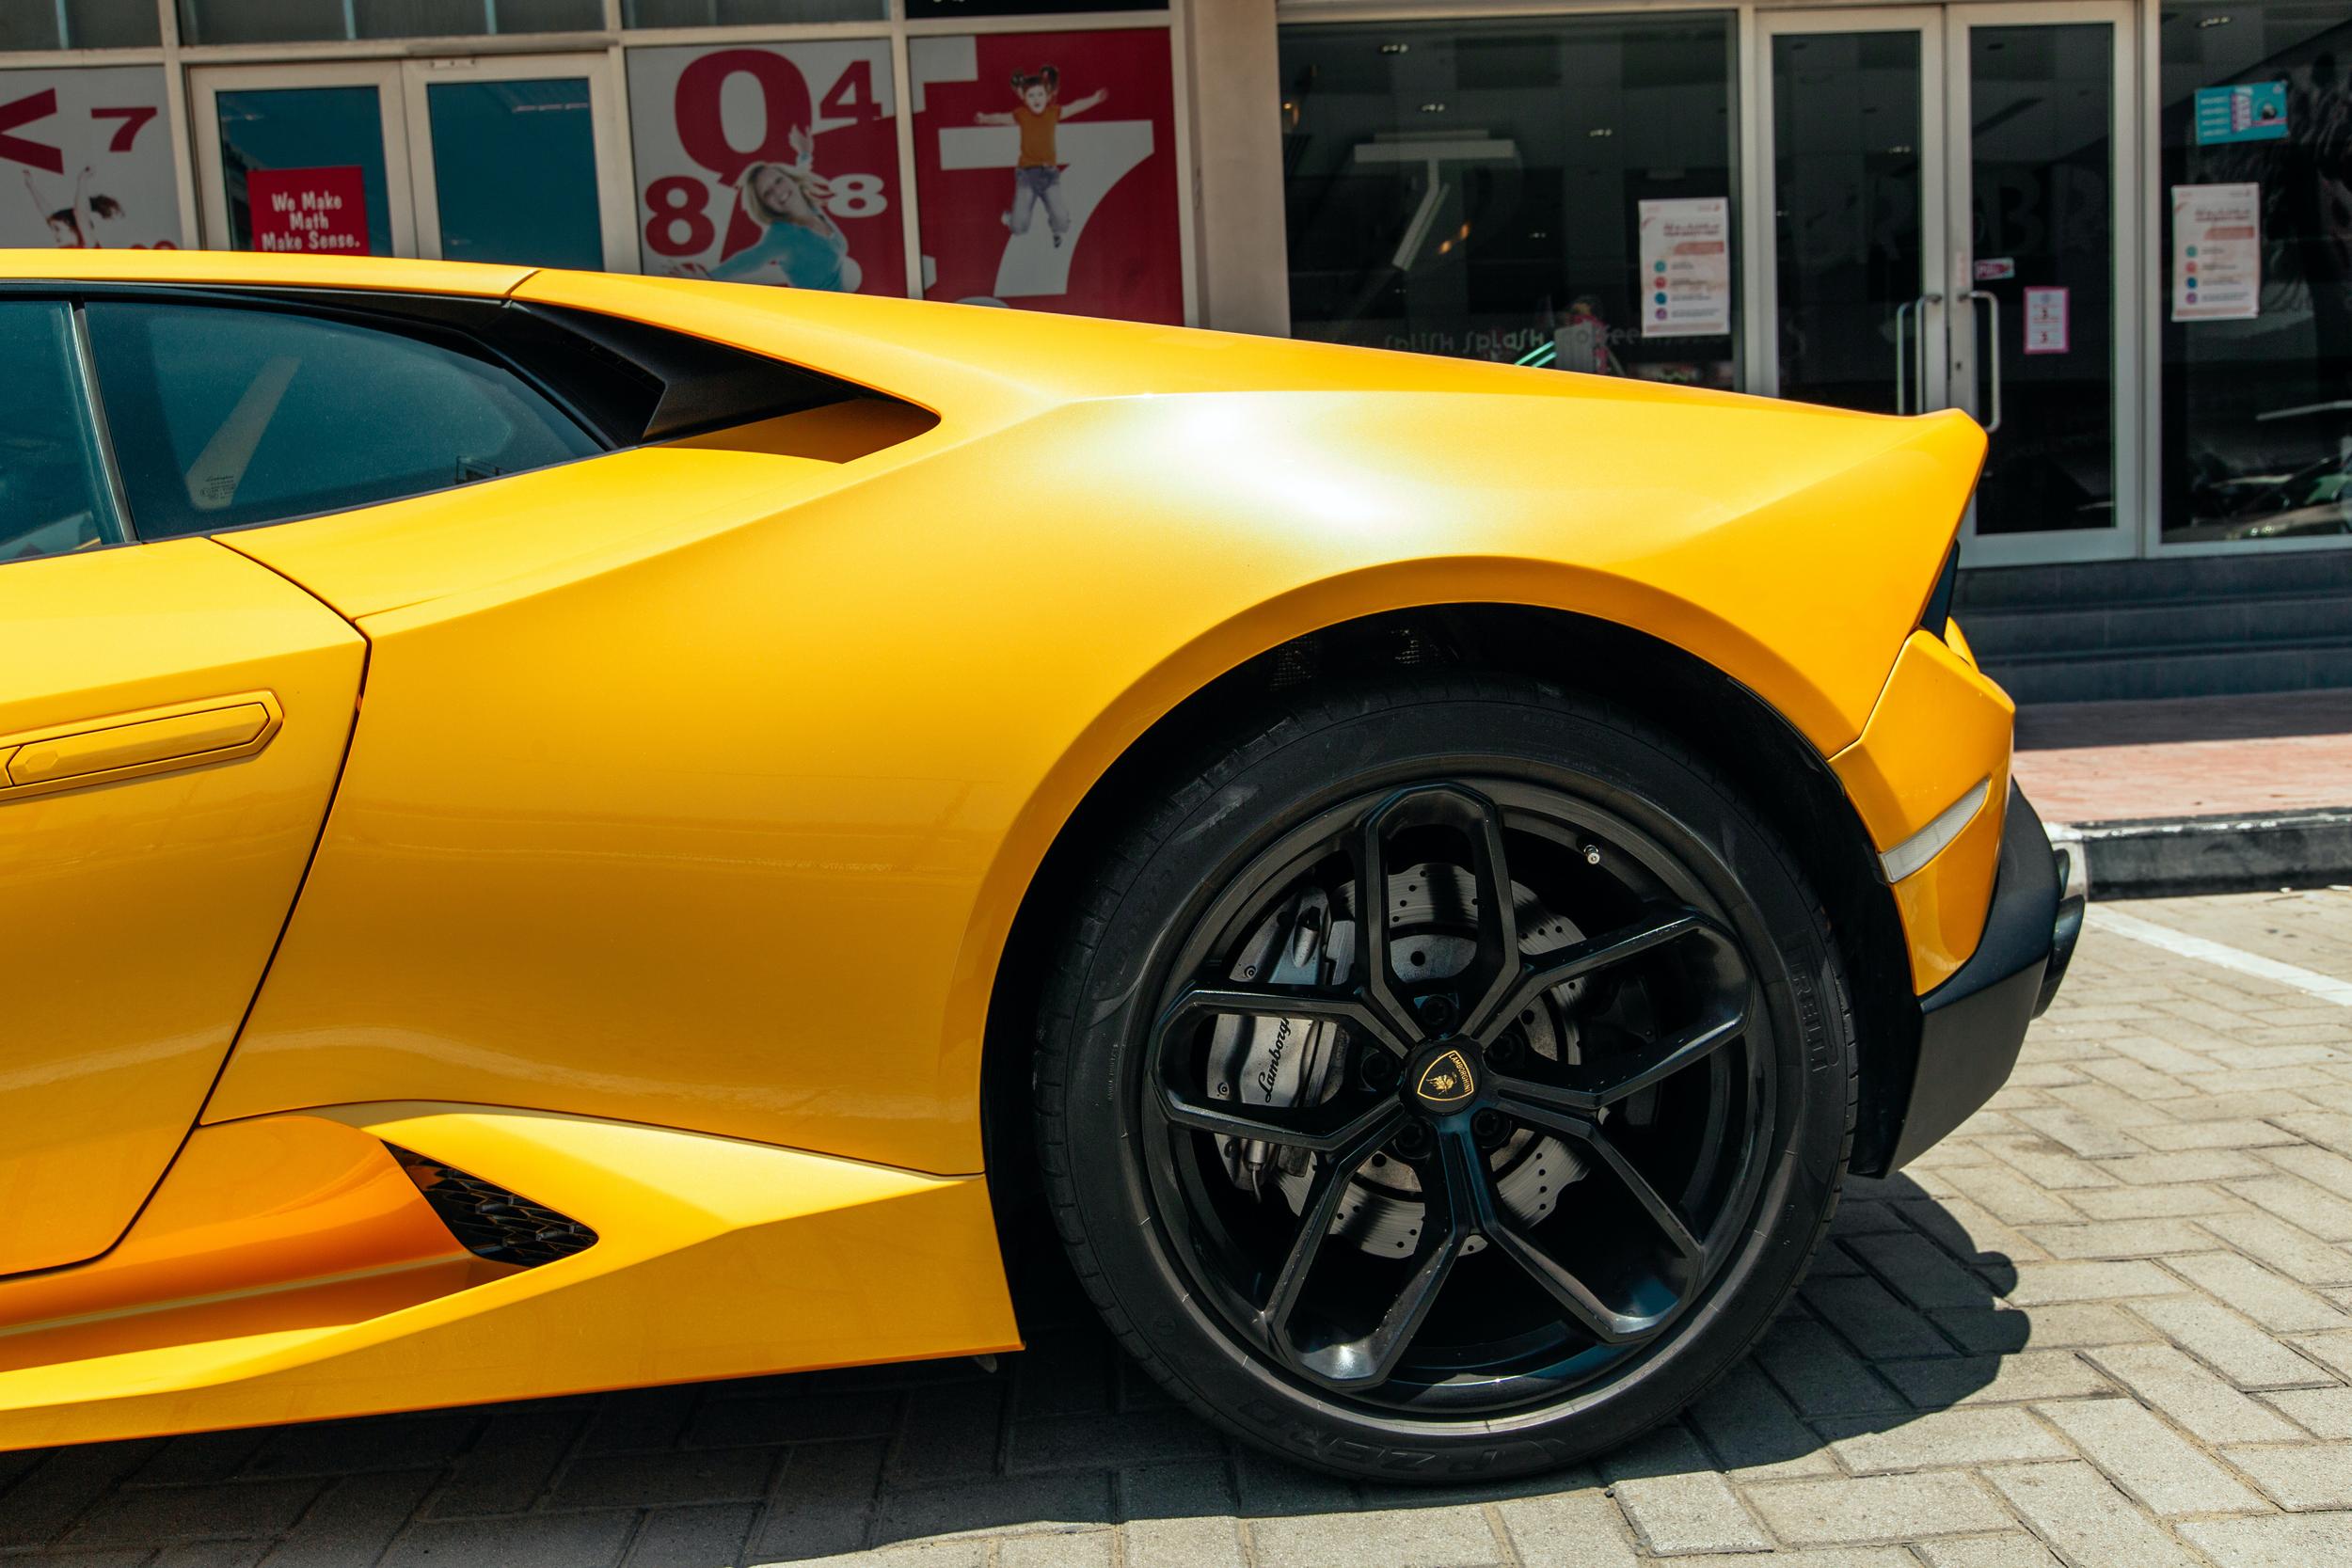 How much is a tire for a lamborghini?